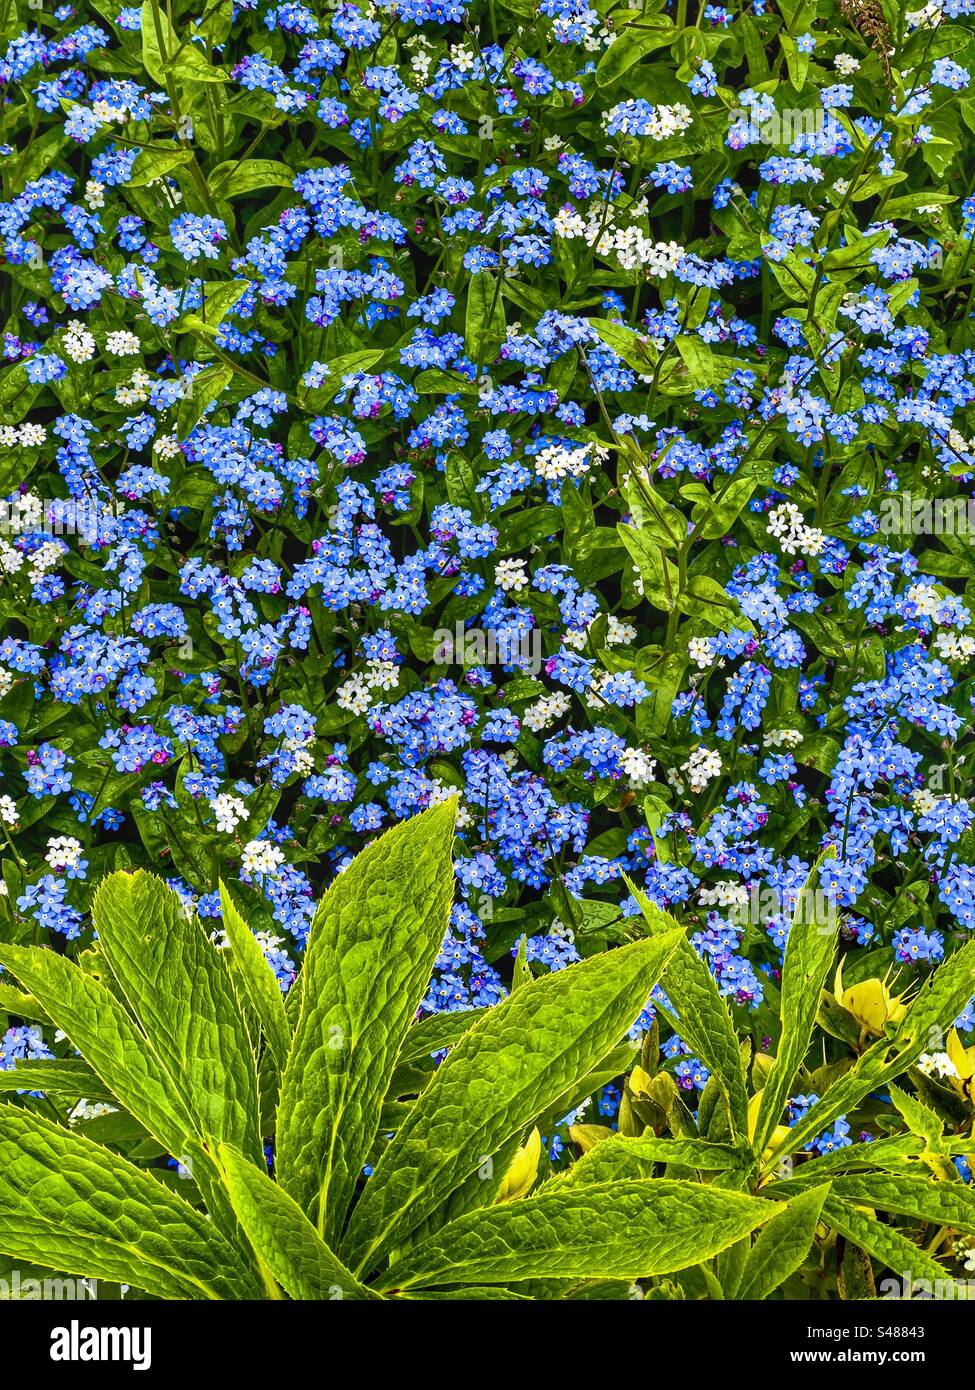 Forget-me-nots myosistis mouse’s ear scorpion grass Stock Photo